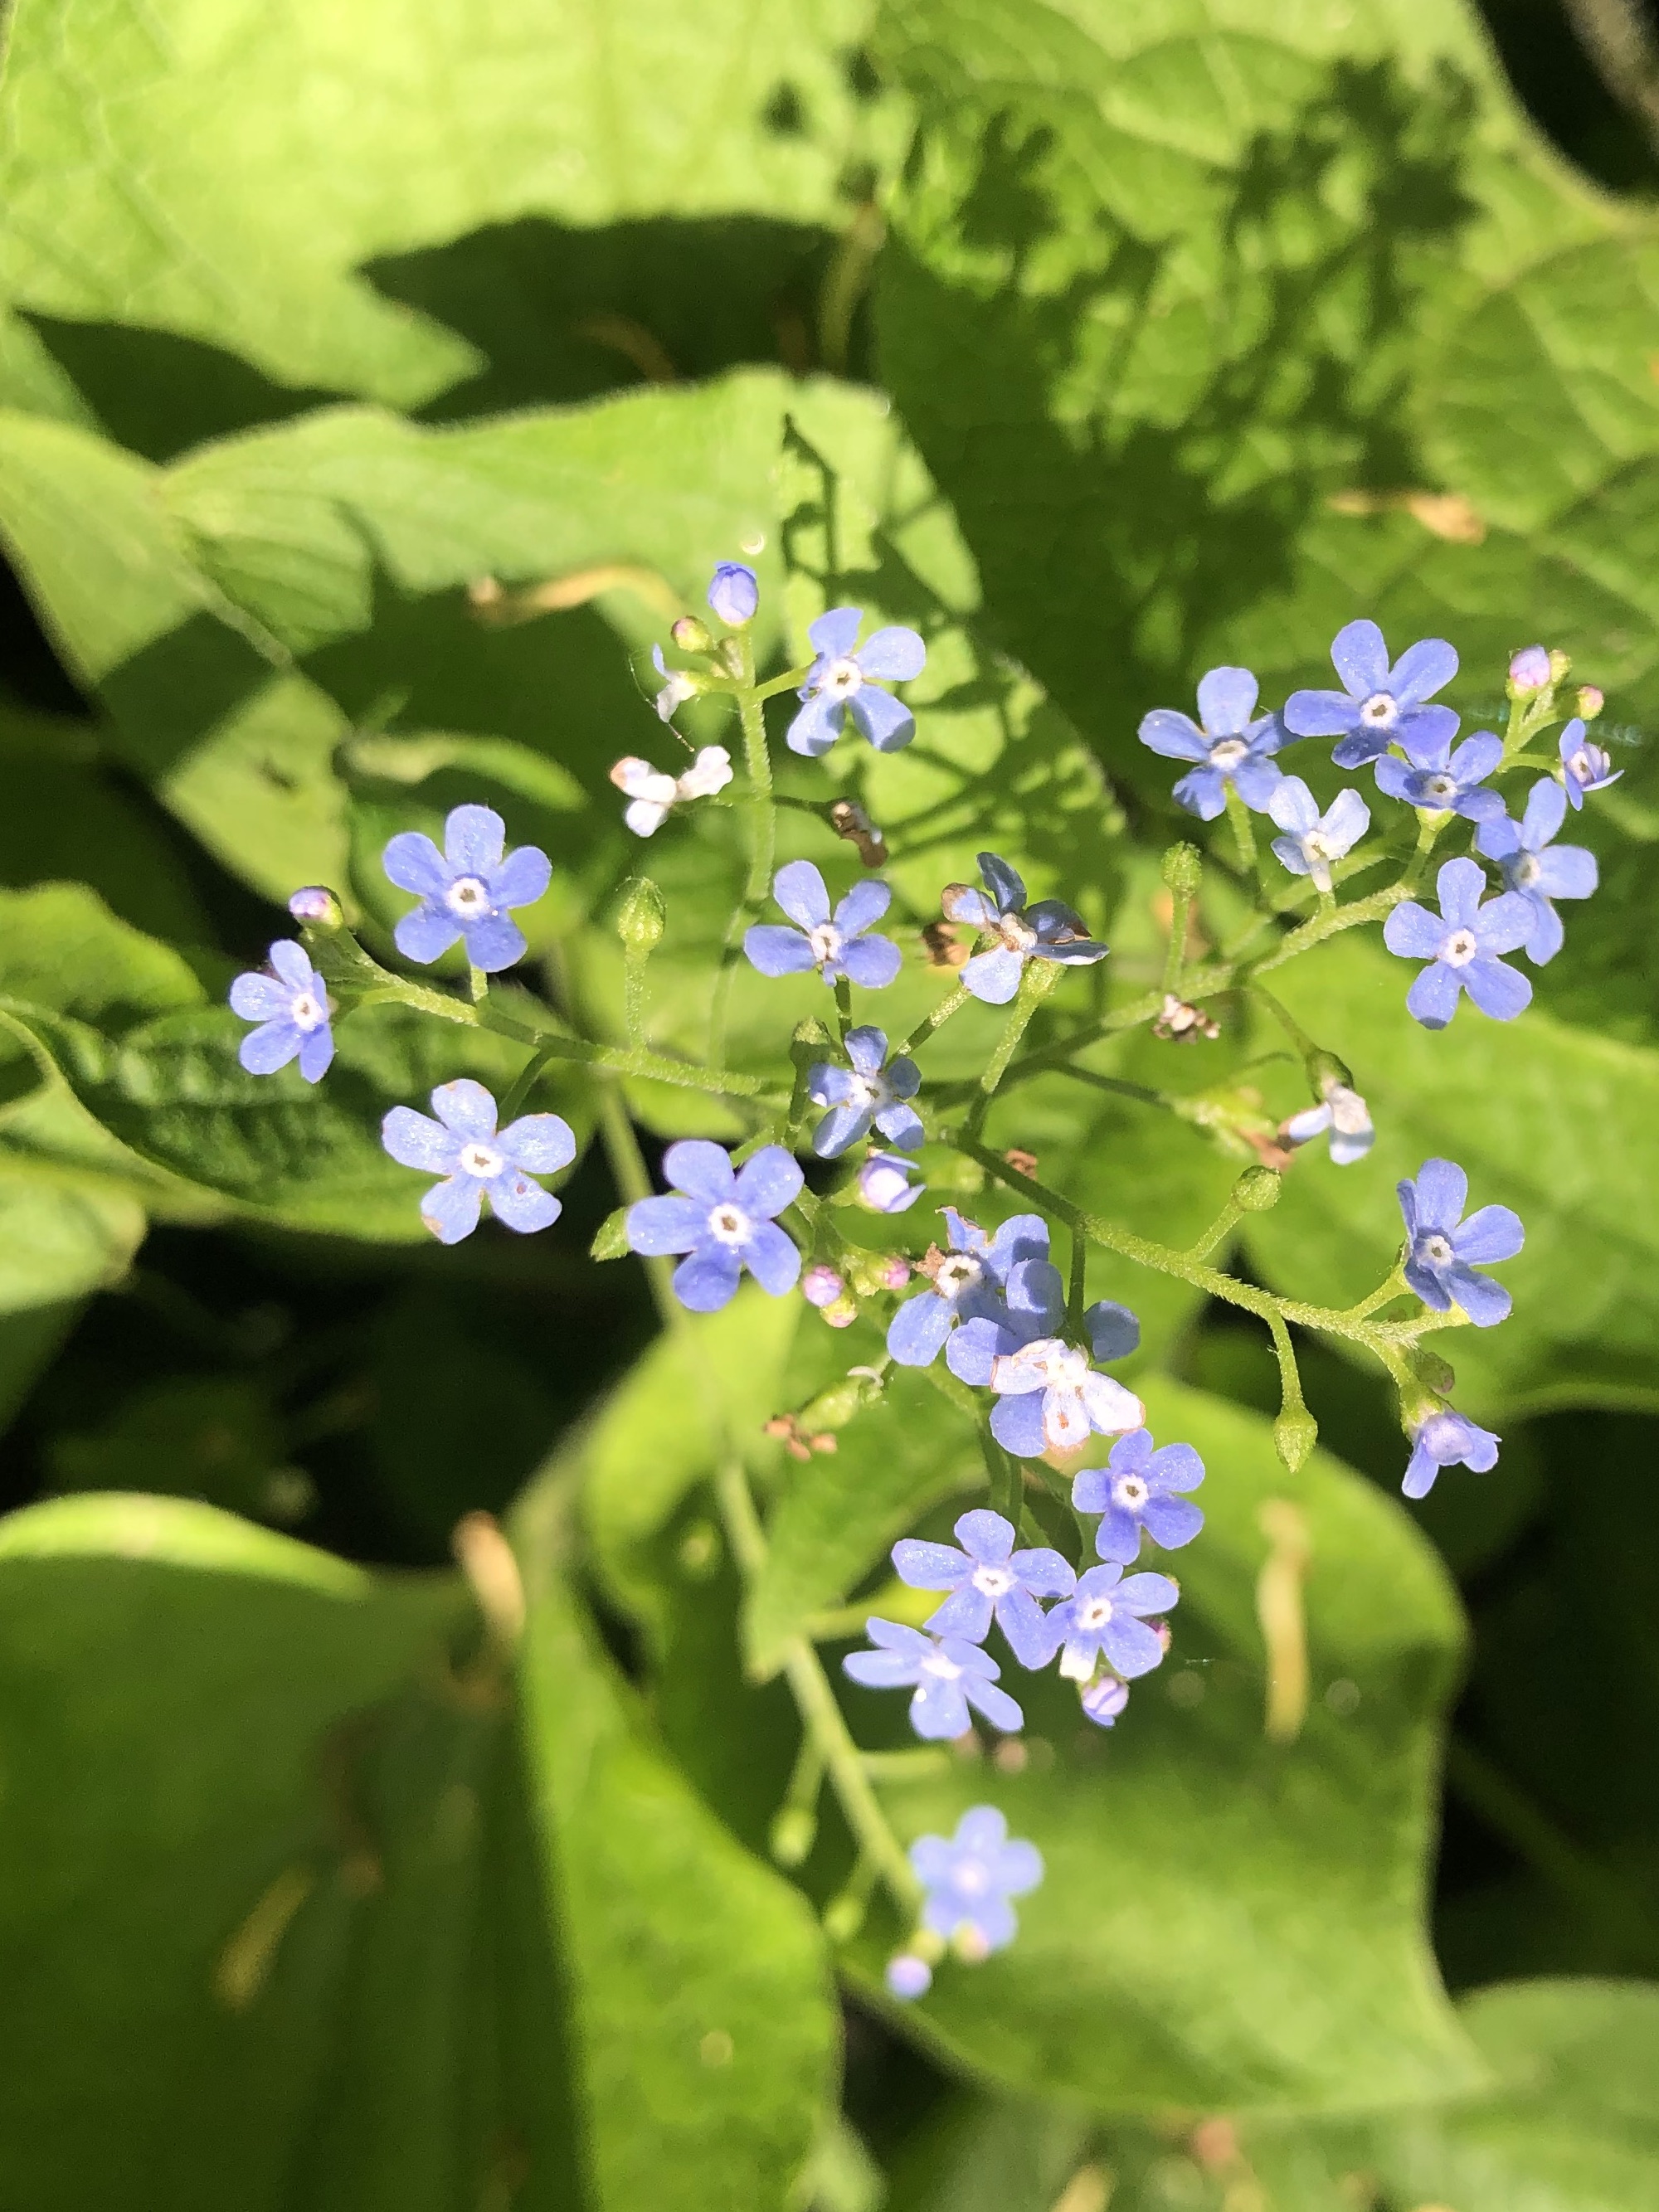 False Forget-Me-Not in the Thoreau Rain Garden in Madison, Wisconsin on May 22, 2022.